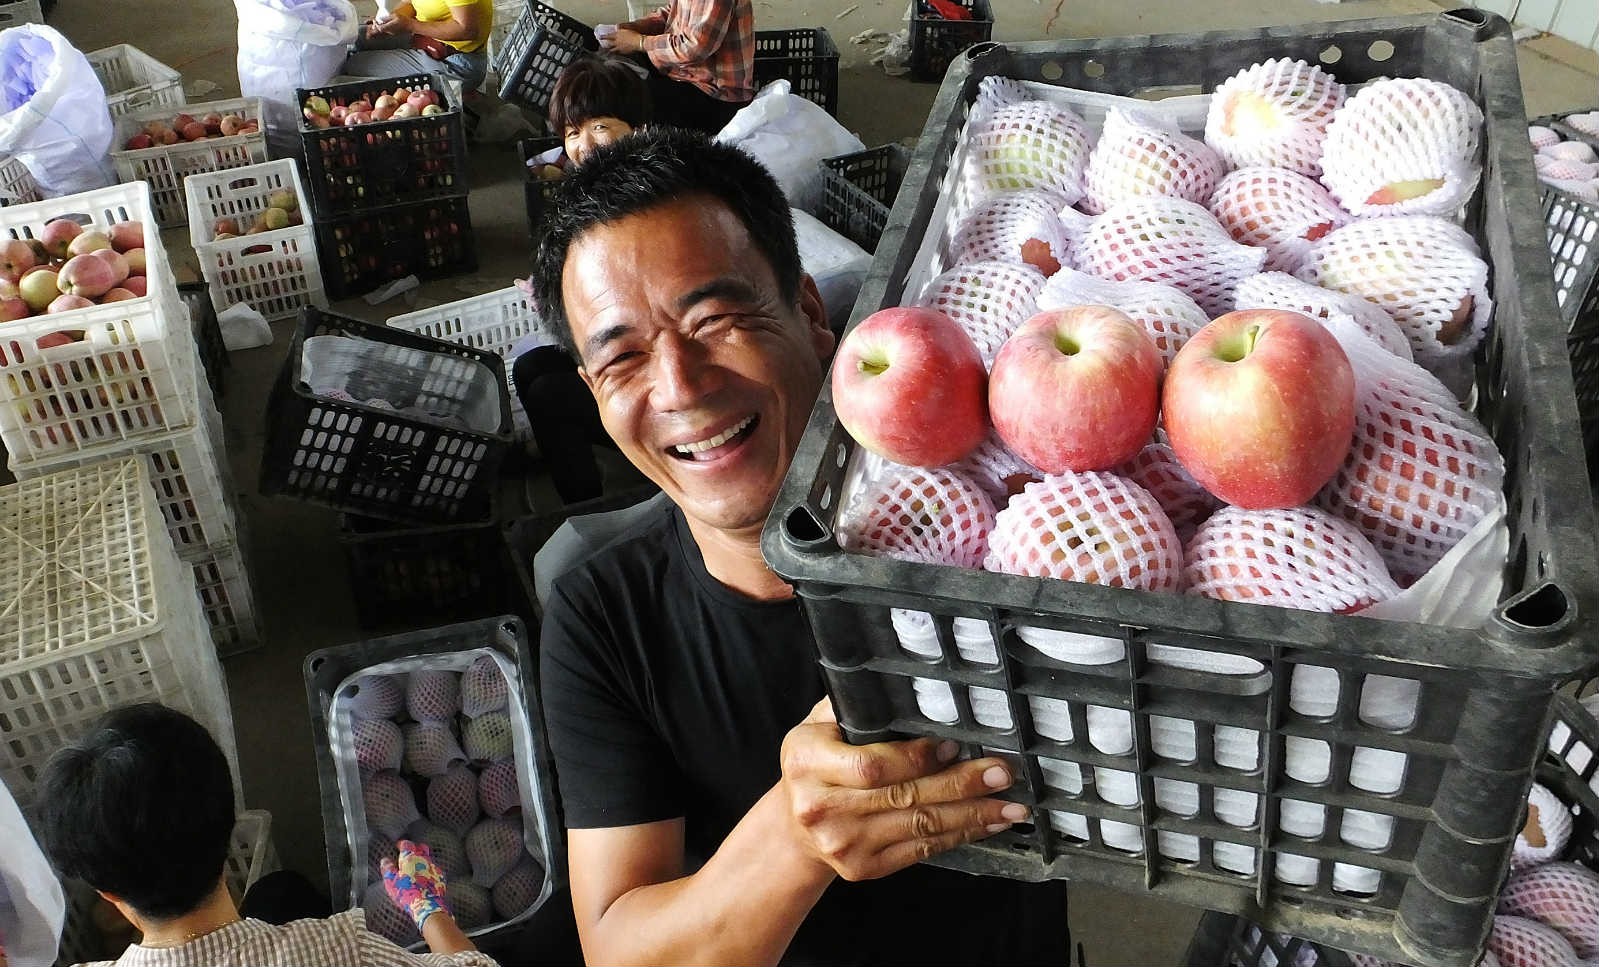 Raspberry cultivation agent in NE China helps drive income growth for villagers